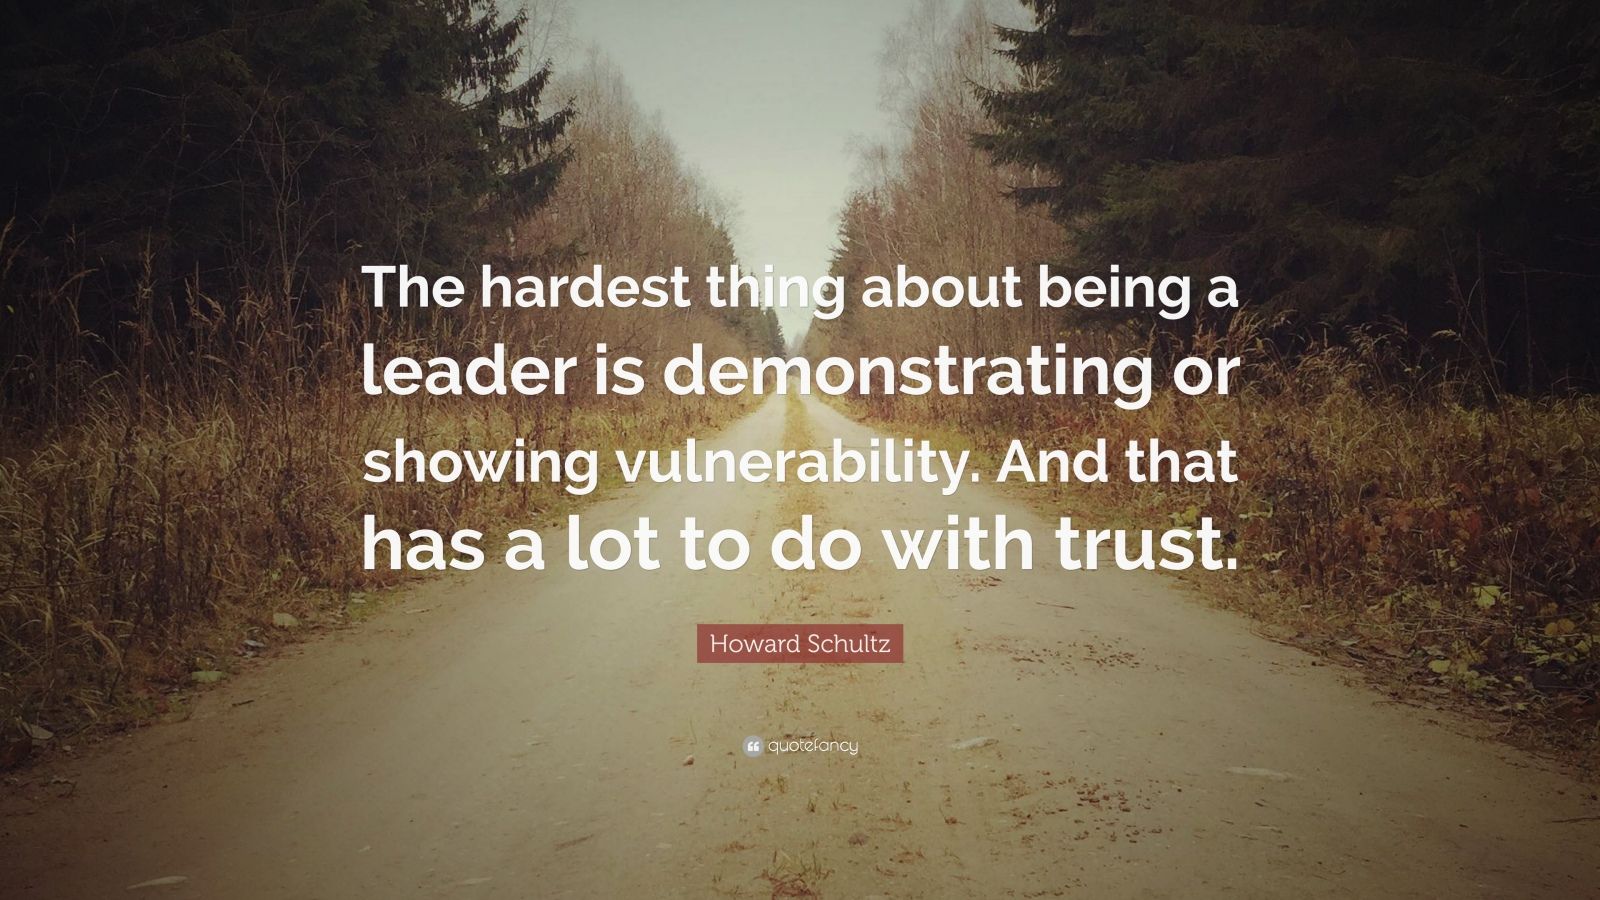 Howard Schultz Quote: “The hardest thing about being a leader is ...